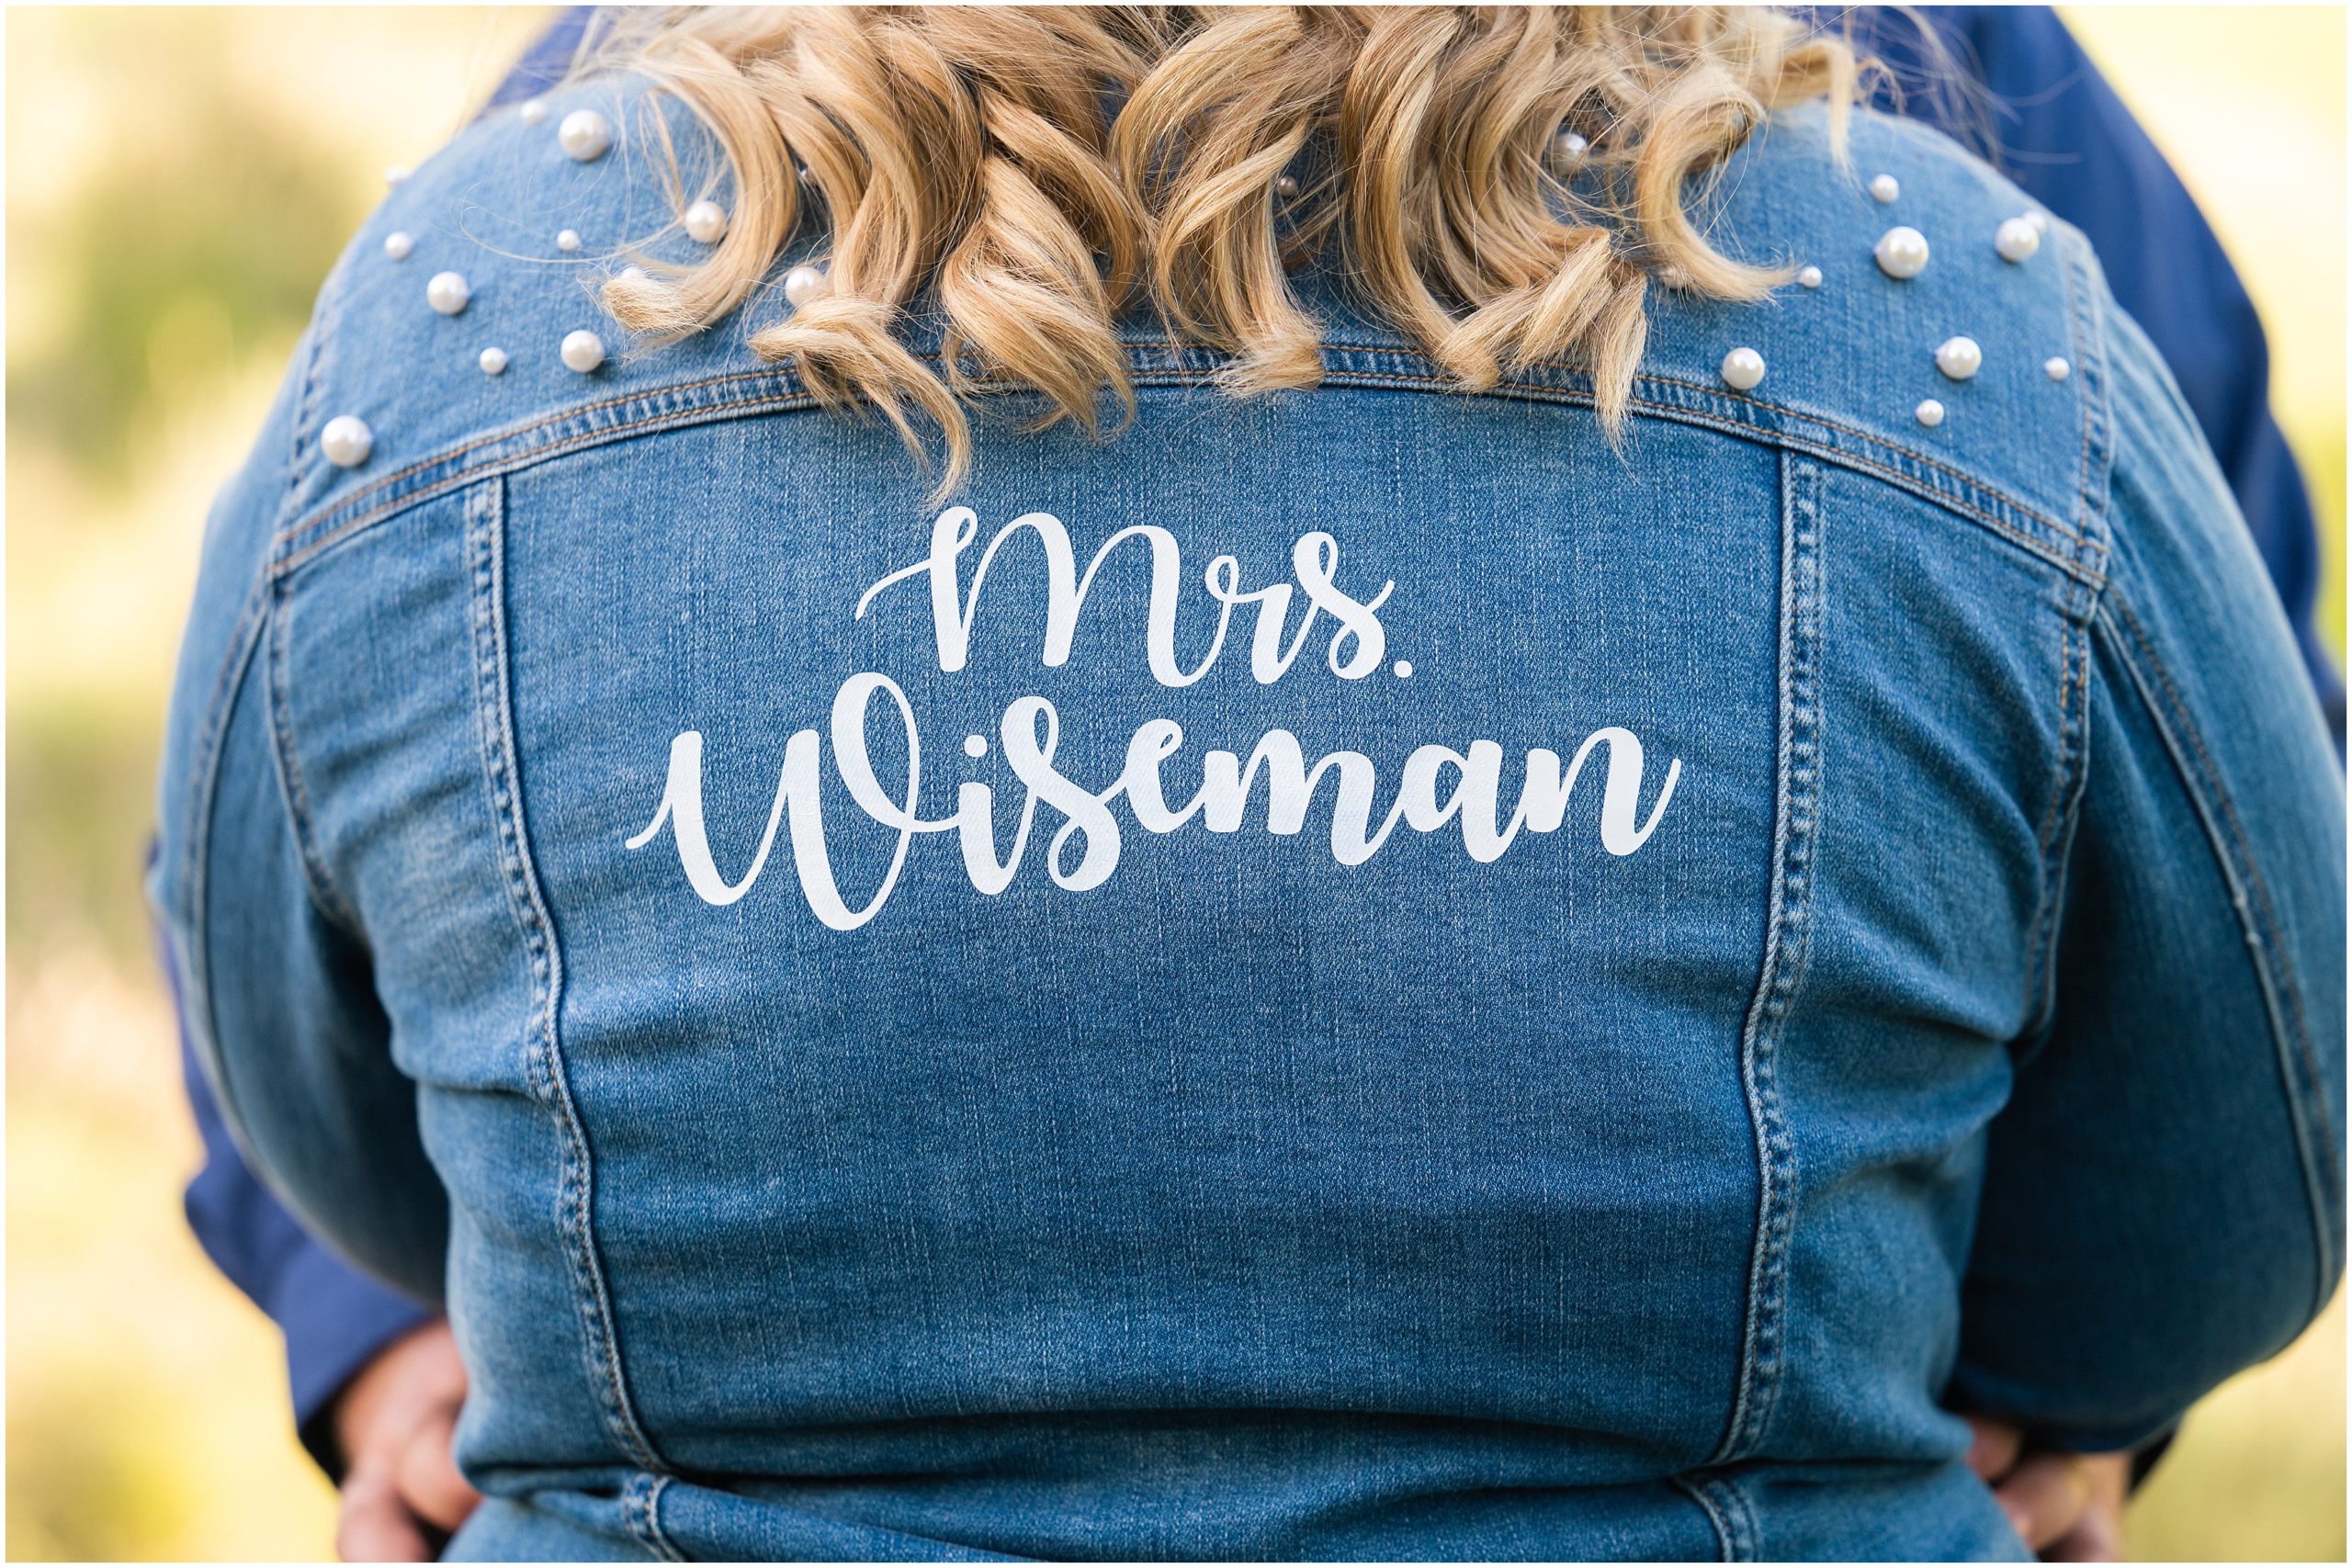 Custom jean jacket with bride's name on | Utah Mountain and Construction Site Engagement Session | Jessie and Dallin Photography